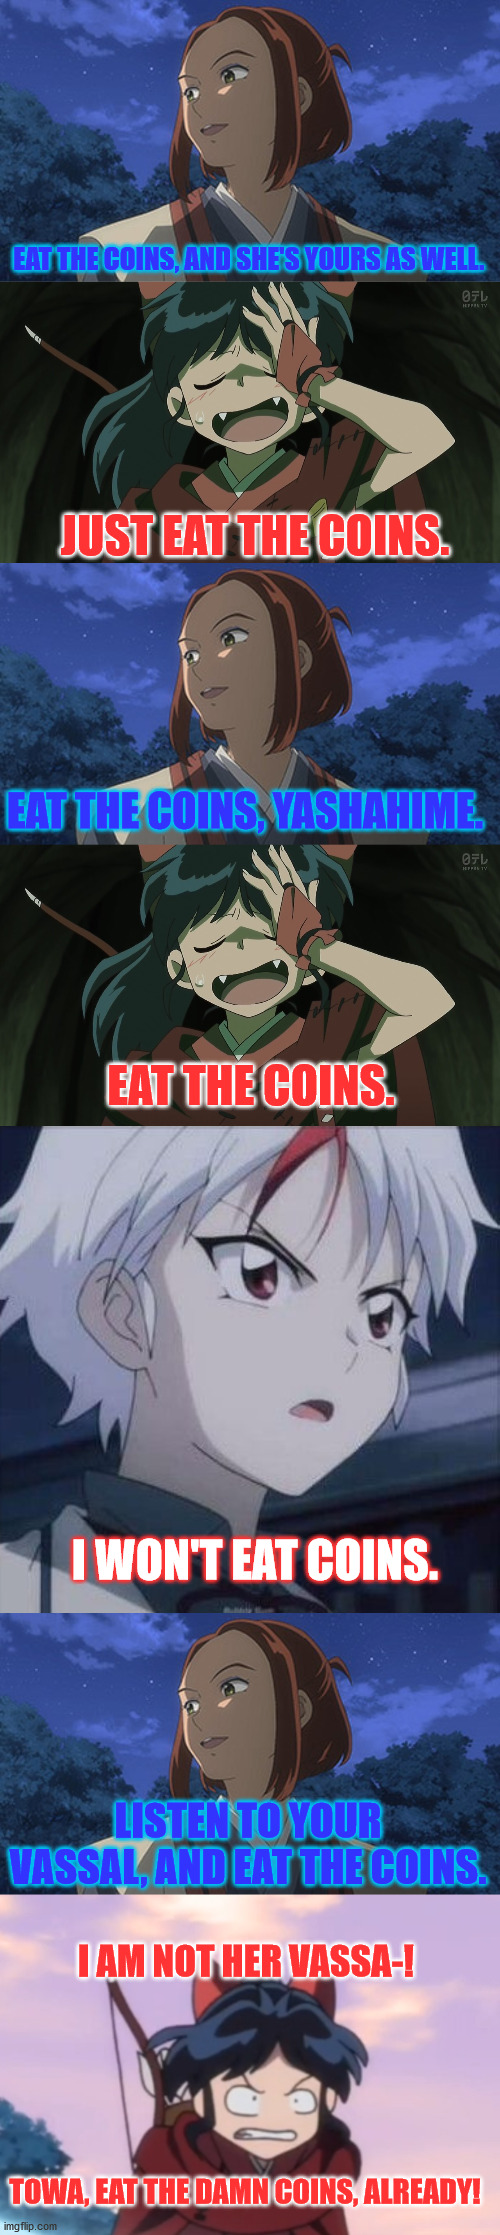 Eat the Coins | EAT THE COINS, AND SHE'S YOURS AS WELL. JUST EAT THE COINS. EAT THE COINS, YASHAHIME. EAT THE COINS. I WON'T EAT COINS. LISTEN TO YOUR VASSAL, AND EAT THE COINS. I AM NOT HER VASSA-! TOWA, EAT THE DAMN COINS, ALREADY! | image tagged in yashahime,inuyasha,venture bros,funny,parody,meme | made w/ Imgflip meme maker